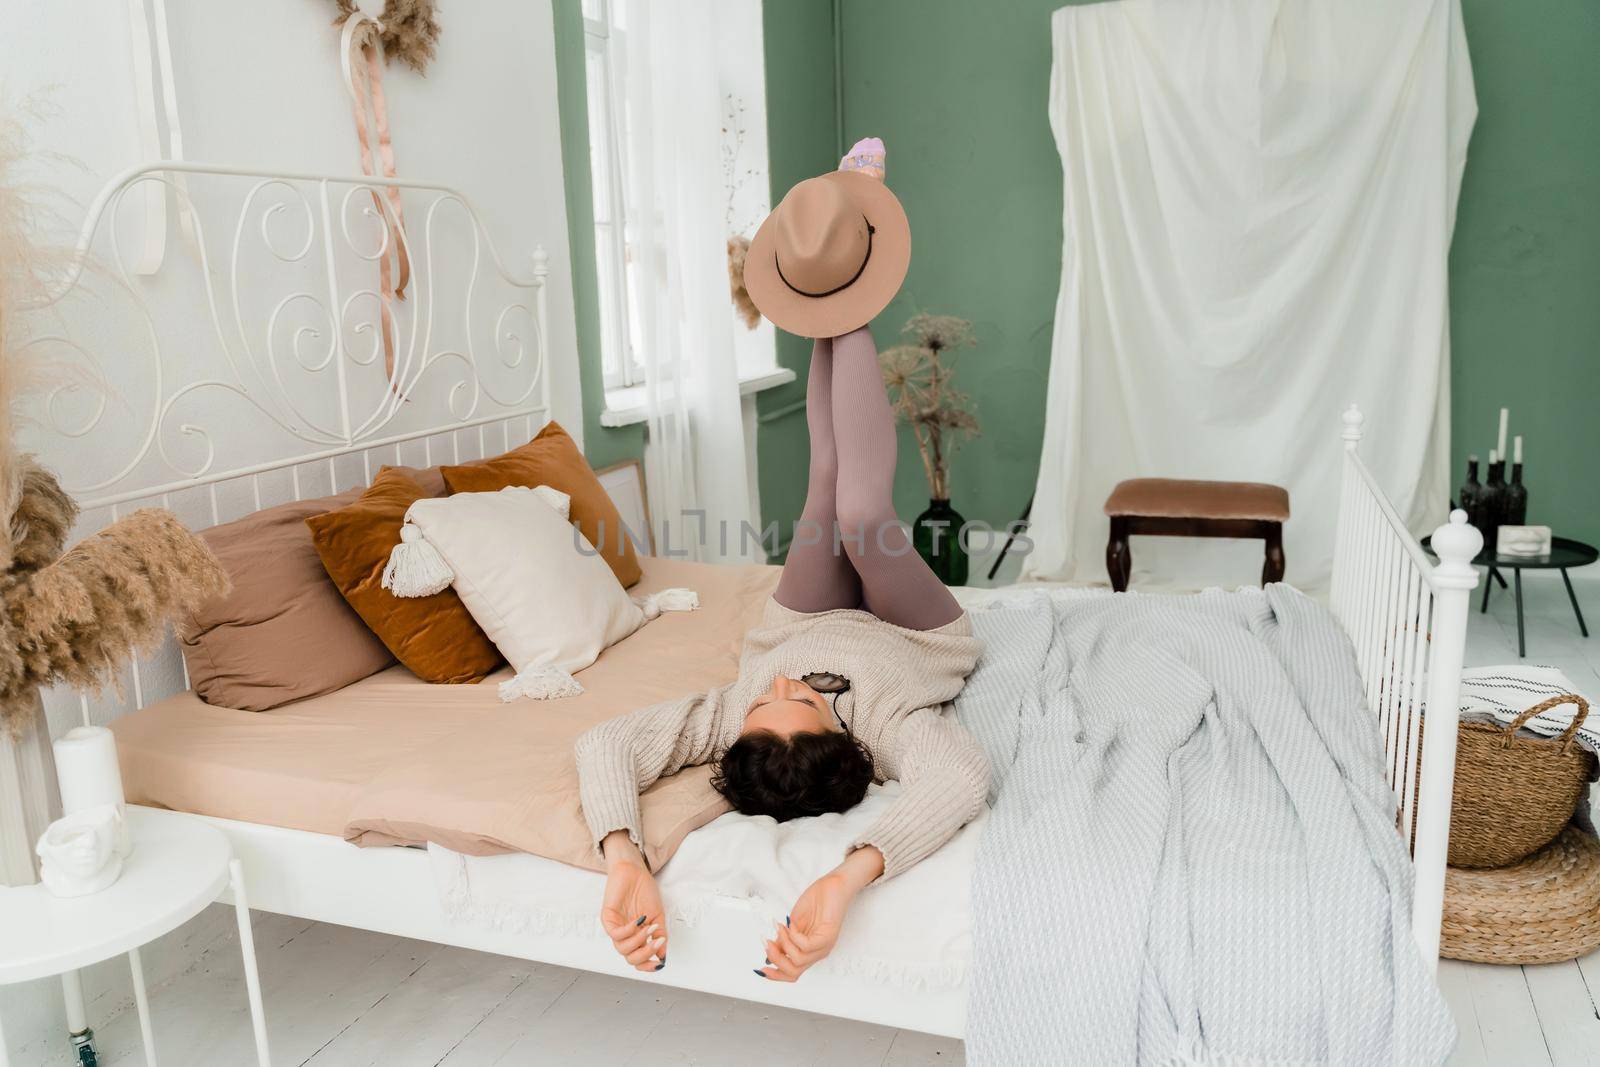 Lifestyle concept. A young middle-aged woman in a sweater lies on the bed on her back, laughs and holds a brown hat on her feet